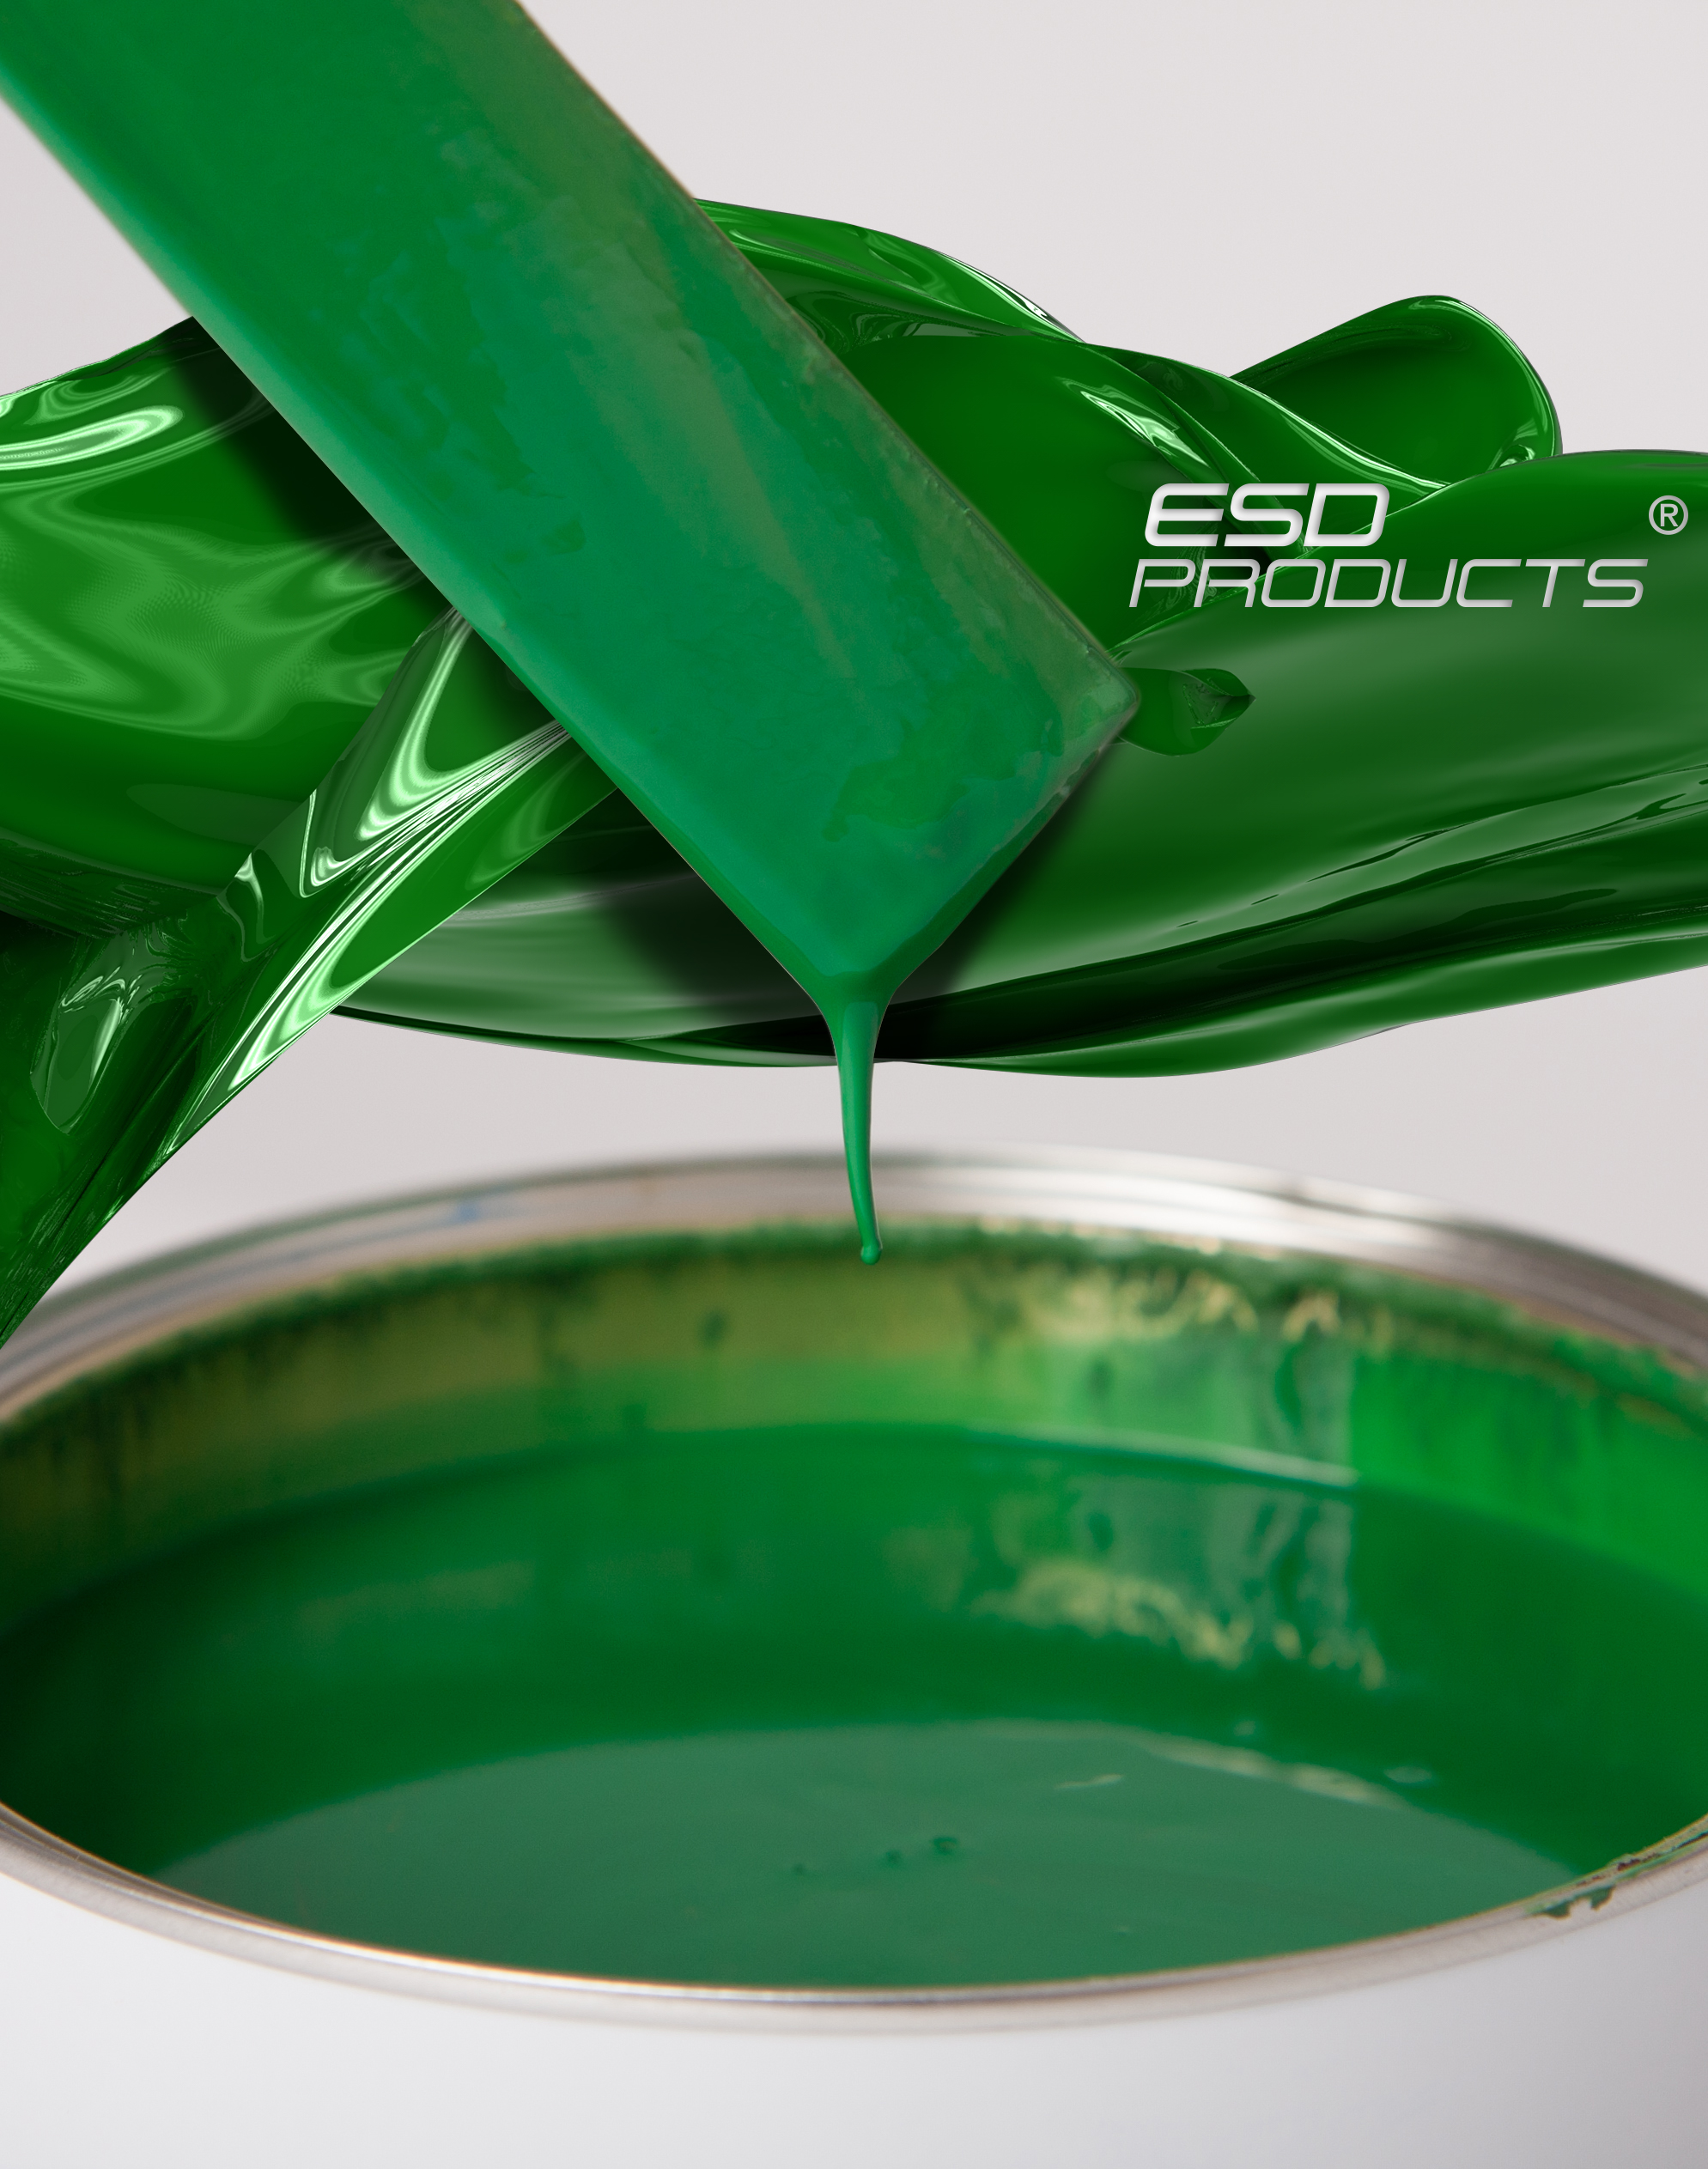 Electroguard A40®  Acrylic ESD Paint Colour 6002 A40-6002 850-A40-6002 ESDproducts